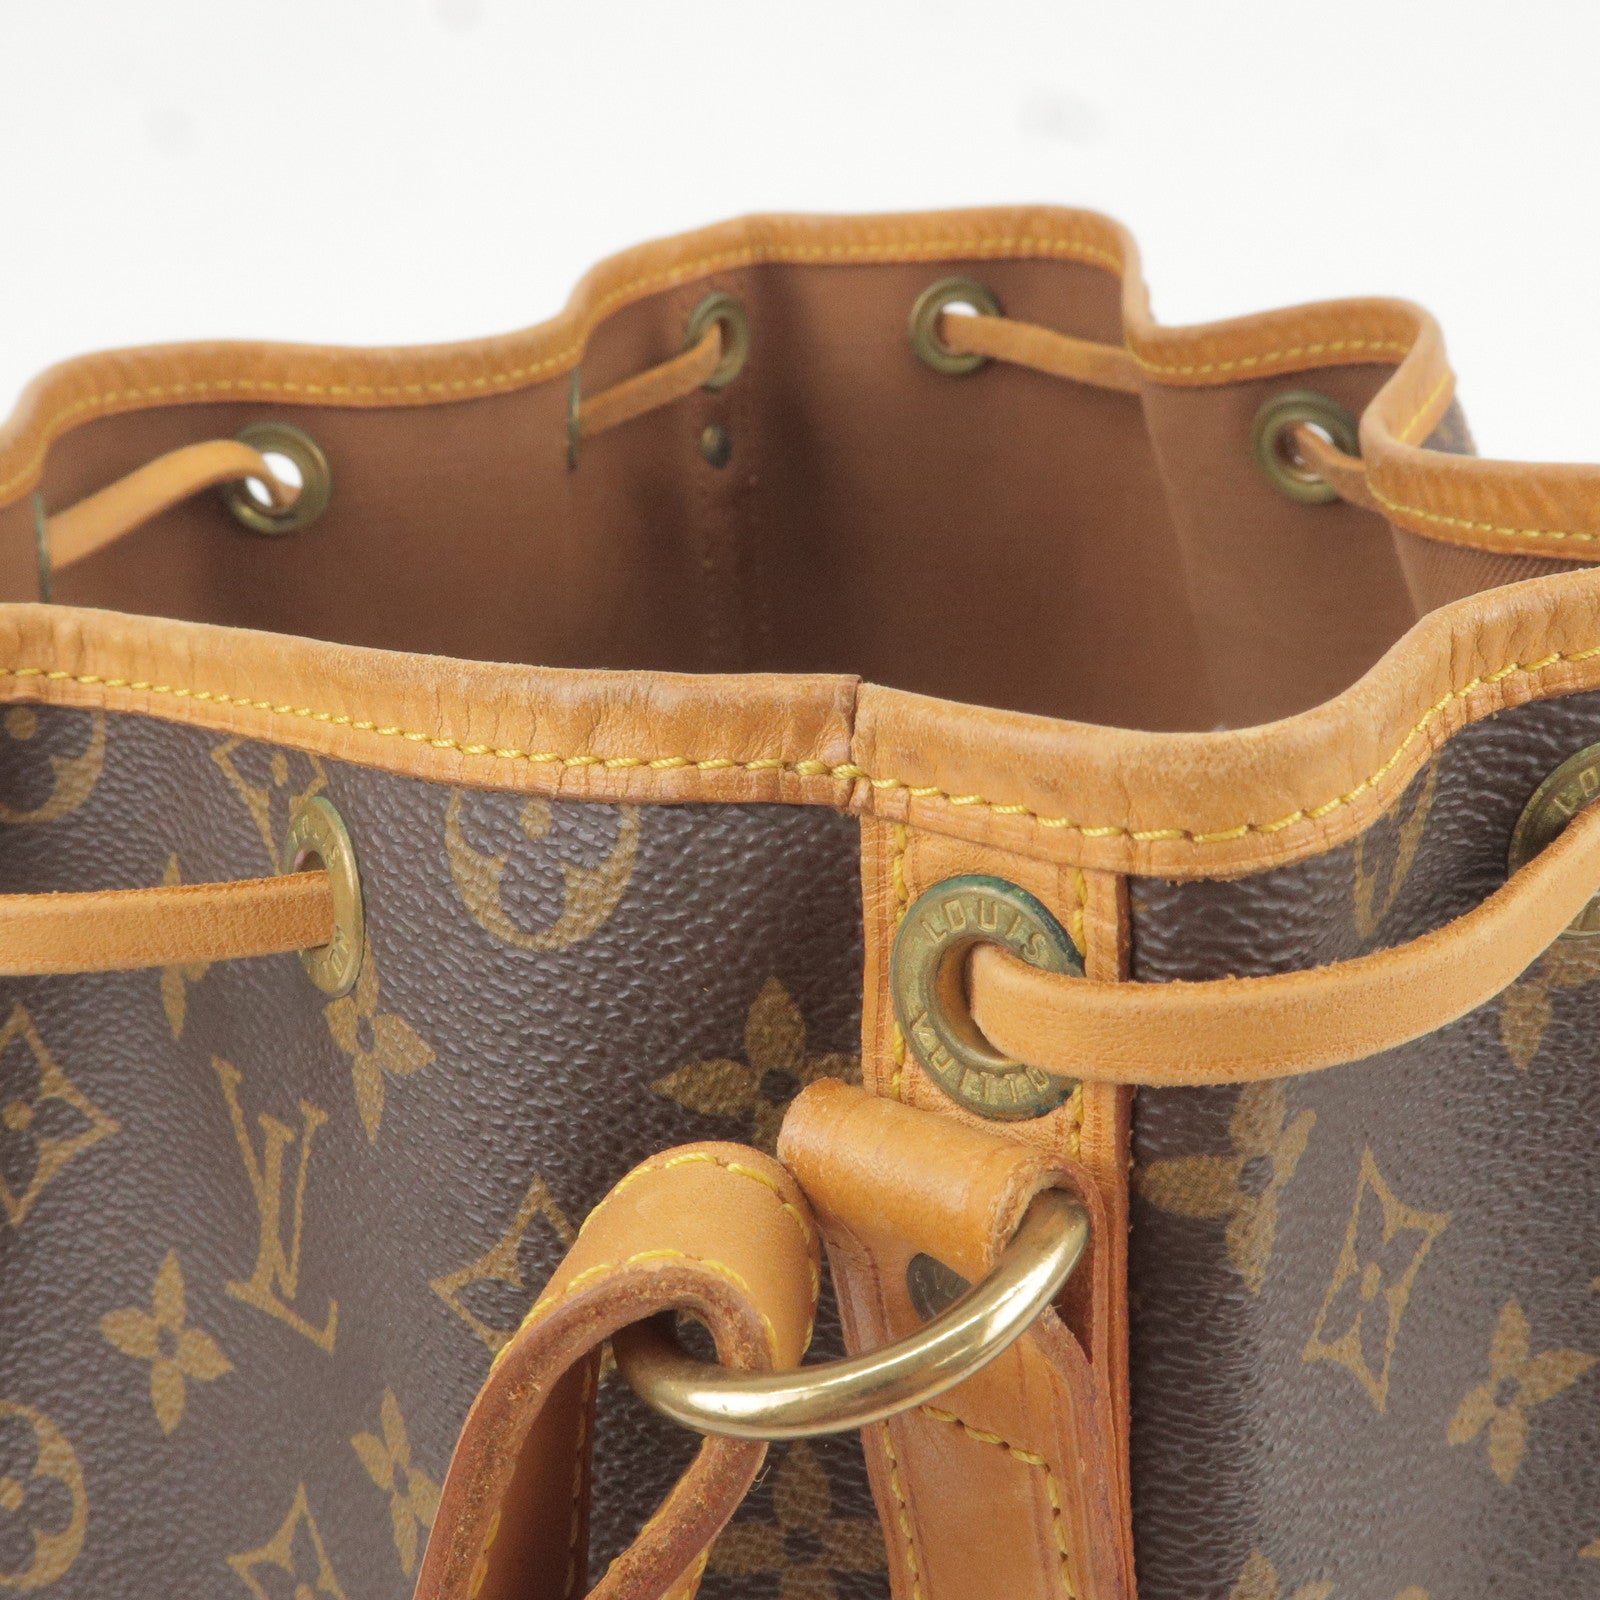 Louis Vuitton Coussin PM sold out !! 4295.00